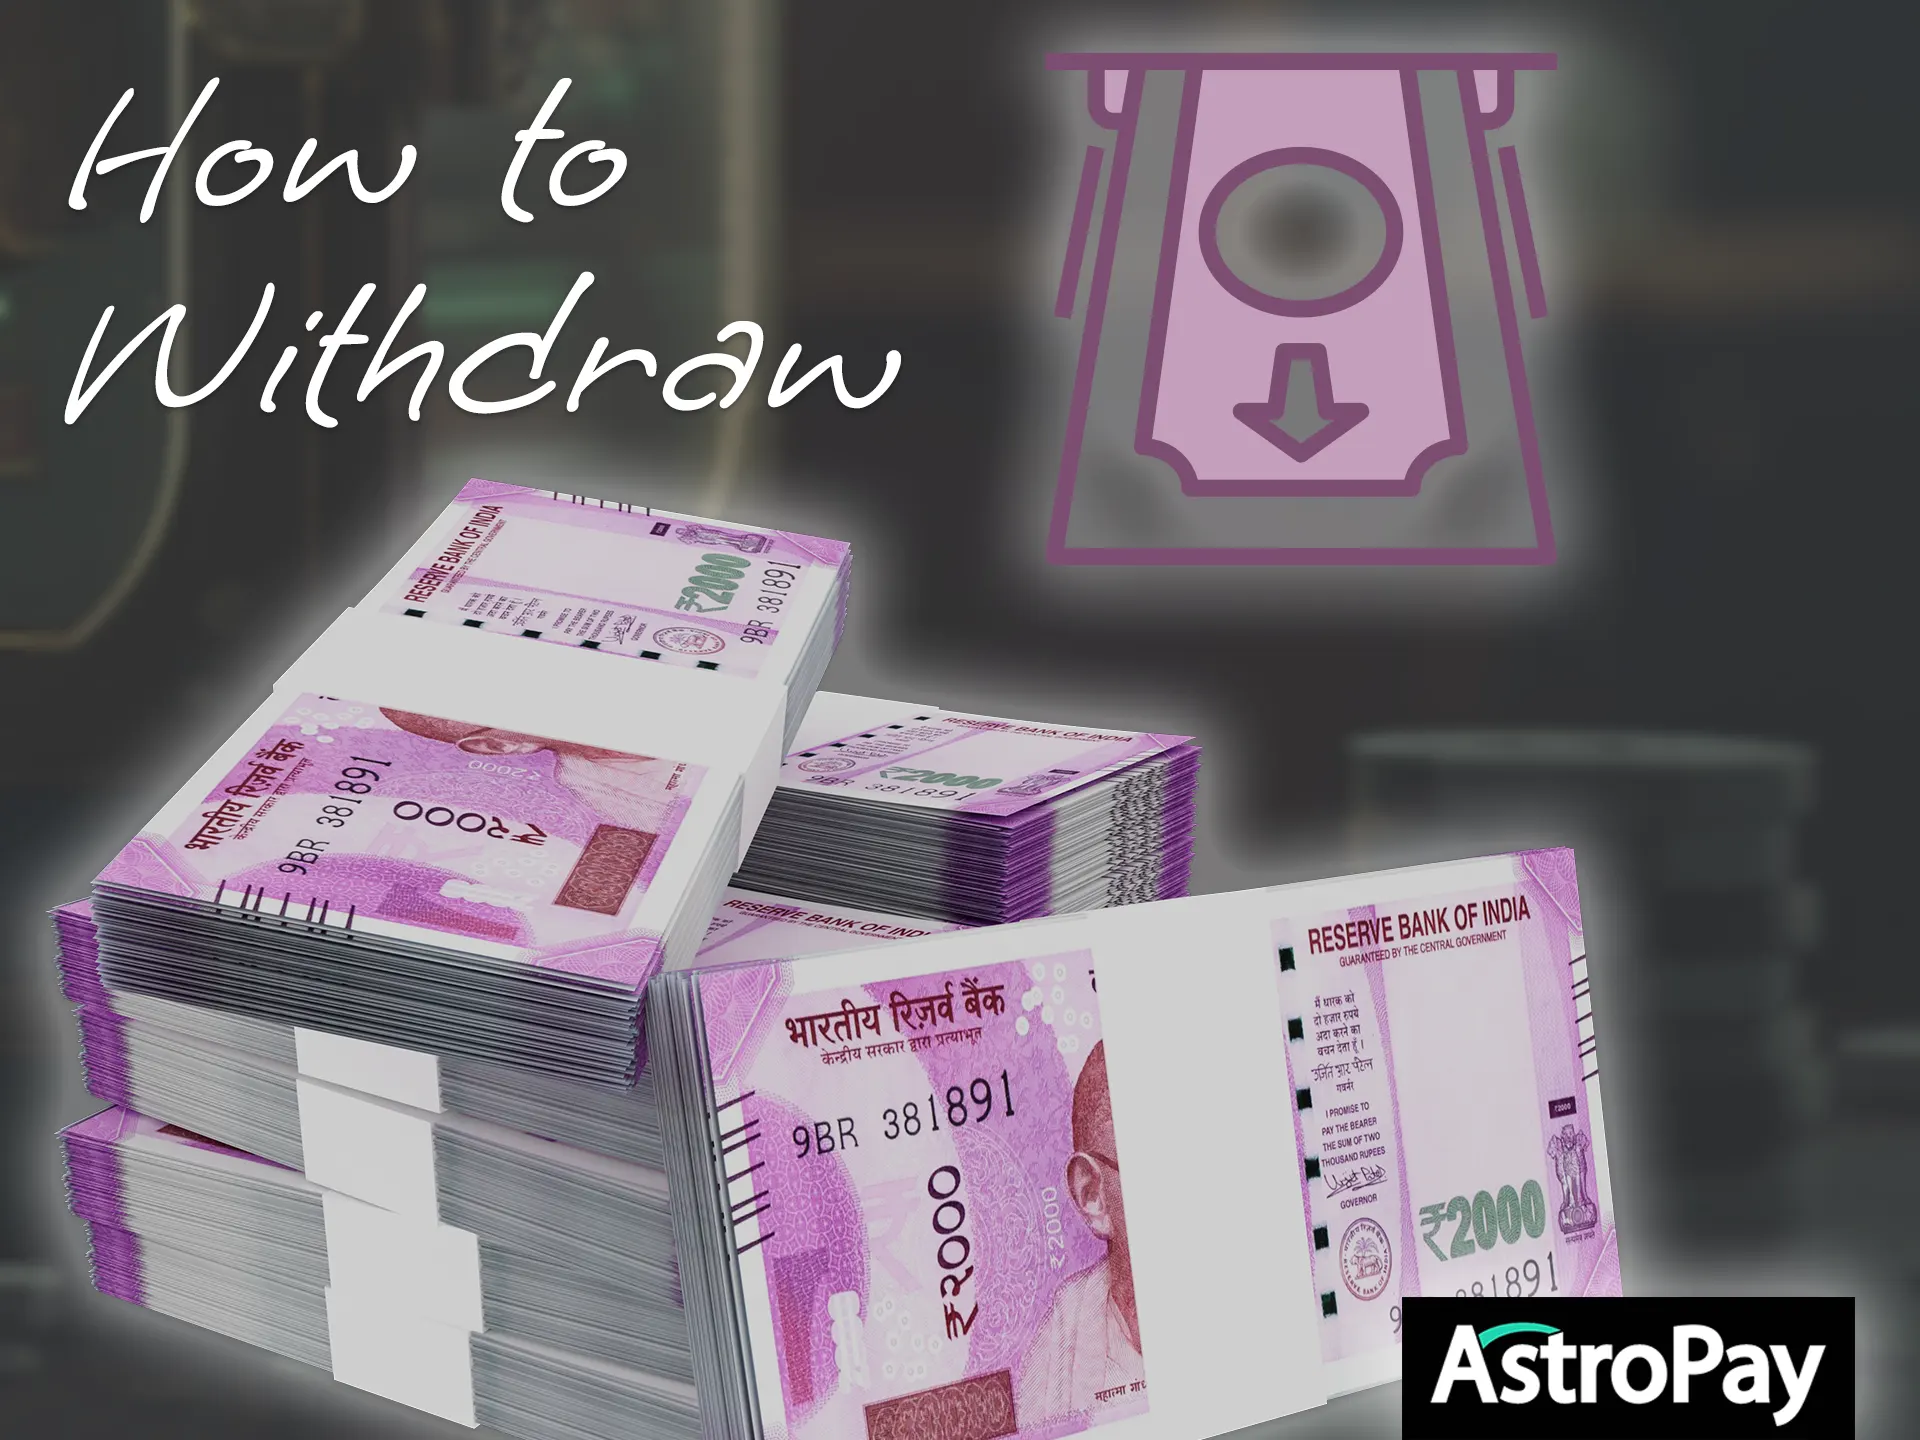 Withdraw money from your gaming account using the AstroPay payment system.